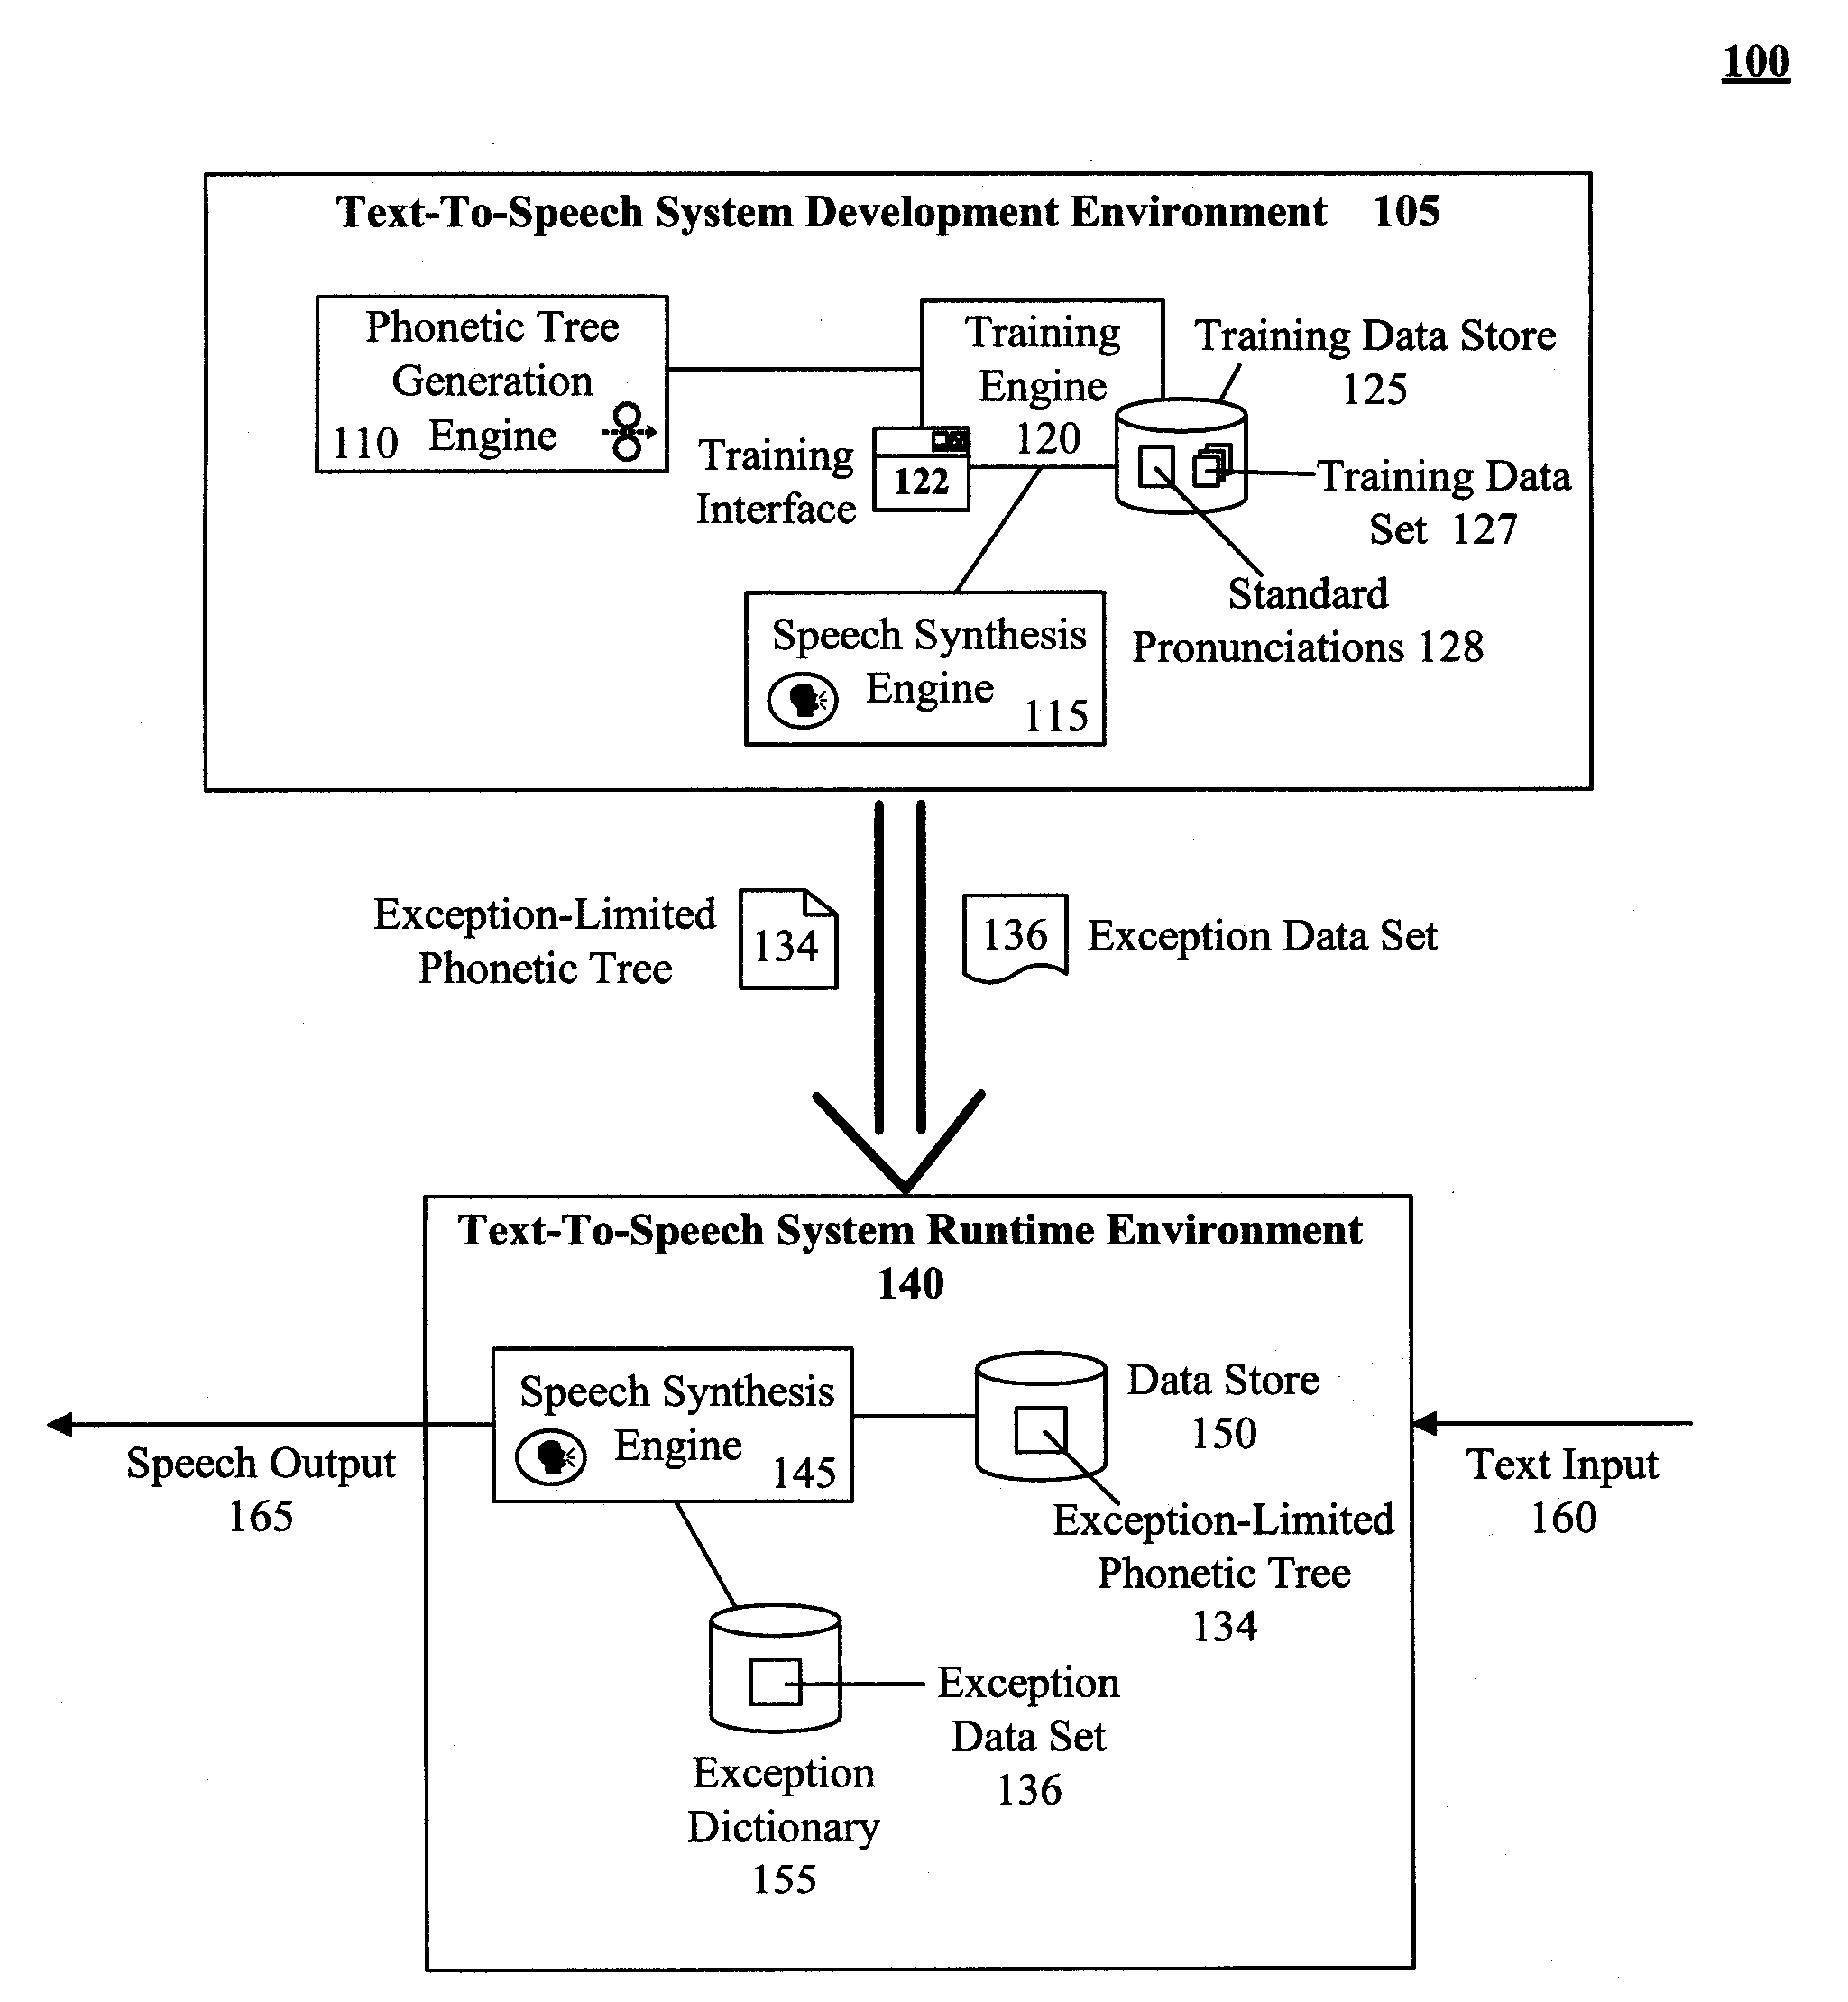 Technique for training a phonetic decision tree with limited phonetic exceptional terms